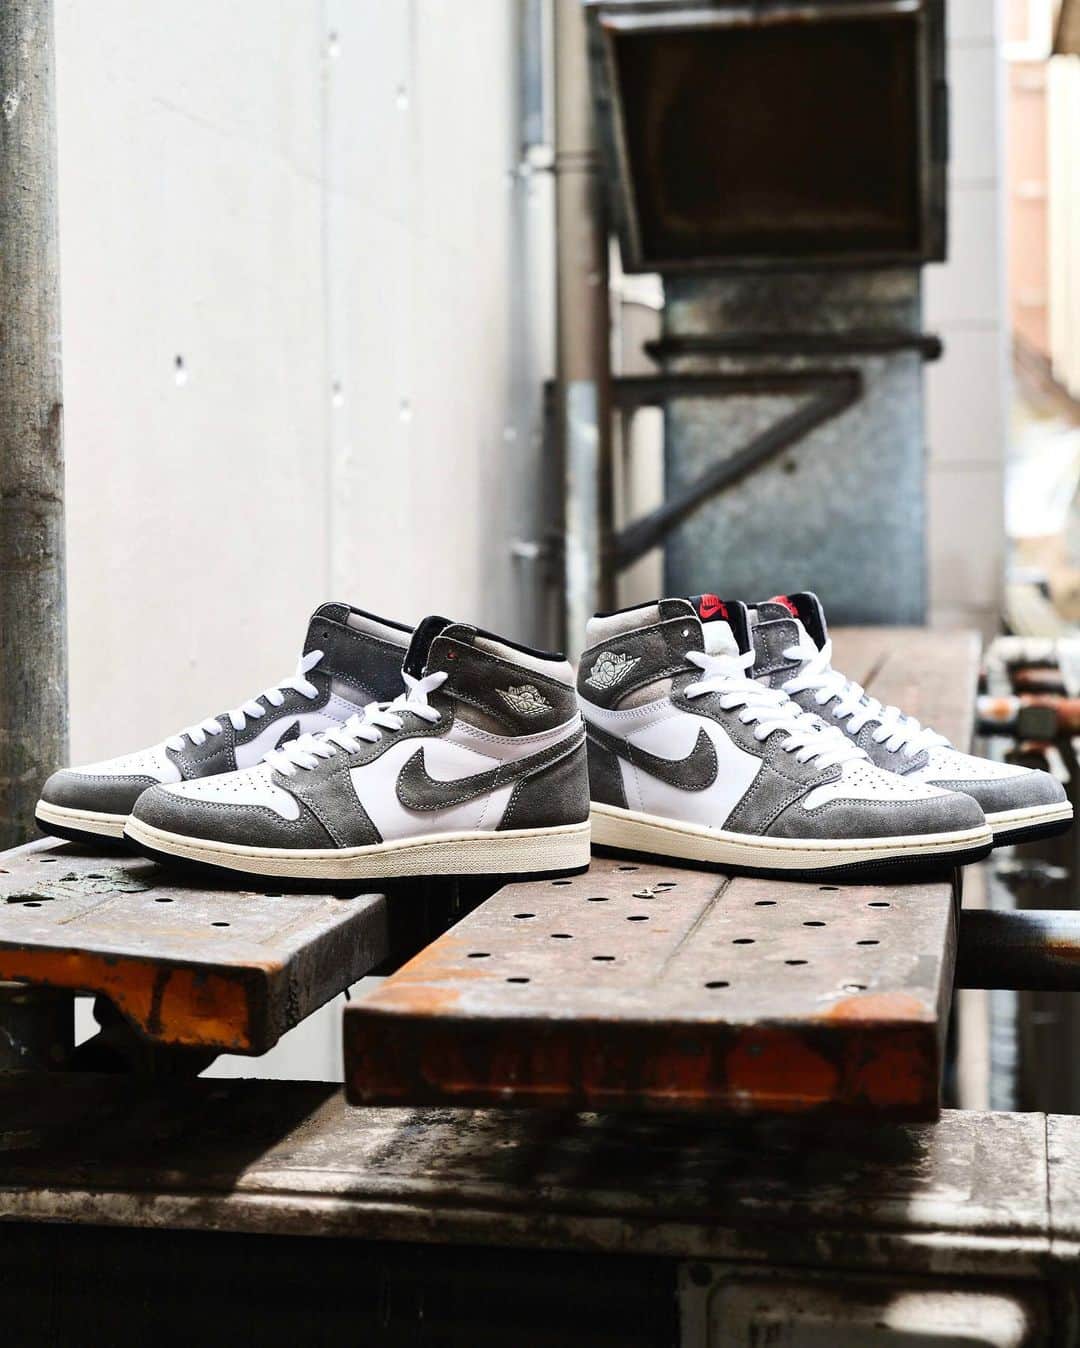 アトモスさんのインスタグラム写真 - (アトモスInstagram)「. AIR JORDAN 1 RETRO HIGH OGから新色が登場。  グレーのスエード、ホワイトのレザー、大胆なブラックのアクセントを使った、時代を超越した一足。あらゆるコーデをレベルアップさせ、どんなシーンにも似合うデザインだ。スウェットと合わせれば、リラックスした雰囲気の中にも洗練さが光るスタイルに。日曜にちょっと近所を散歩するときなどにぴったりだ。すっきりとした美しいシルエットは、フォーマルなイベントにも対応。コーディネートは無限に広がる。自分にしっくりくるものをチョイスしよう。 本商品は6月6日(火)よりatmos-tokyo.comにて抽選受付開始。6月10日(土)よりatmos 各店（一部店舗除く）、atmos オンラインにて発売致します。  A new colorway from the AIR JORDAN 1 RETRO HIGH OG is now available.  This timeless pair is made with gray suede, white leather, and bold black accents. It's a design that will level up any outfit and look great for any occasion. Pair them with a sweatshirt for a relaxed yet sophisticated look. They are perfect for a Sunday stroll around the neighborhood. The clean, beautiful silhouette can also be worn to formal events. The coordination possibilities are endless. Choose the one that fits you best. This product will be available at atmos-tokyo.com from June 6 (Tue), and will go on sale at all atmos stores (excluding some stores) and atmos online from June 10 (Sat).  #atmos #airjordan1 #aj1」6月5日 9時45分 - atmos_japan